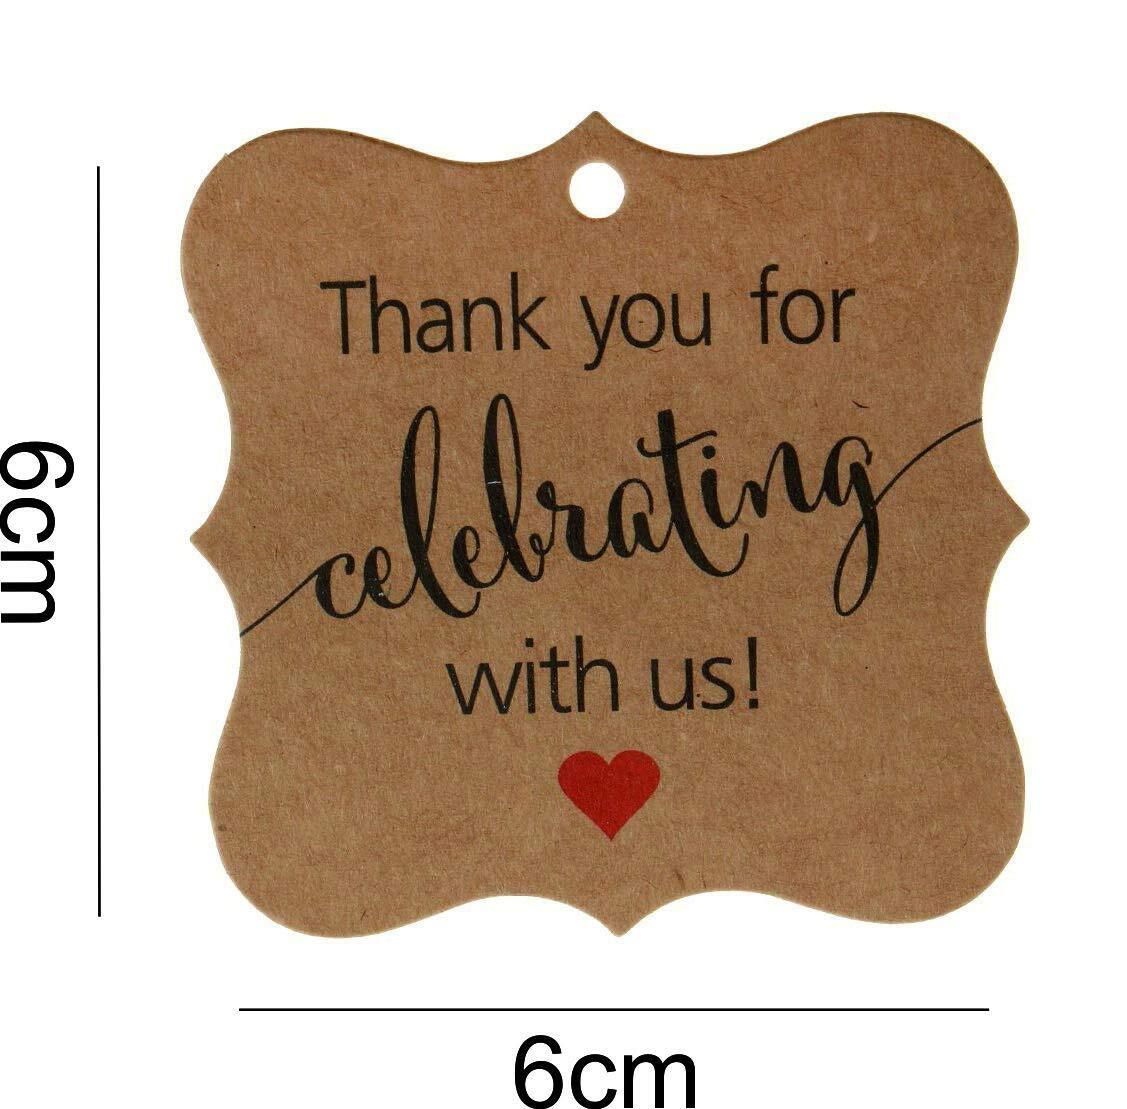 Atmiyamart Thank You Cards Gift Tags Vintage Kraft Paper Hang Tags Wedding Party FavorBirthday Party Handmade Tag brown brand tag maker Customize Hanging Tag GiftTag